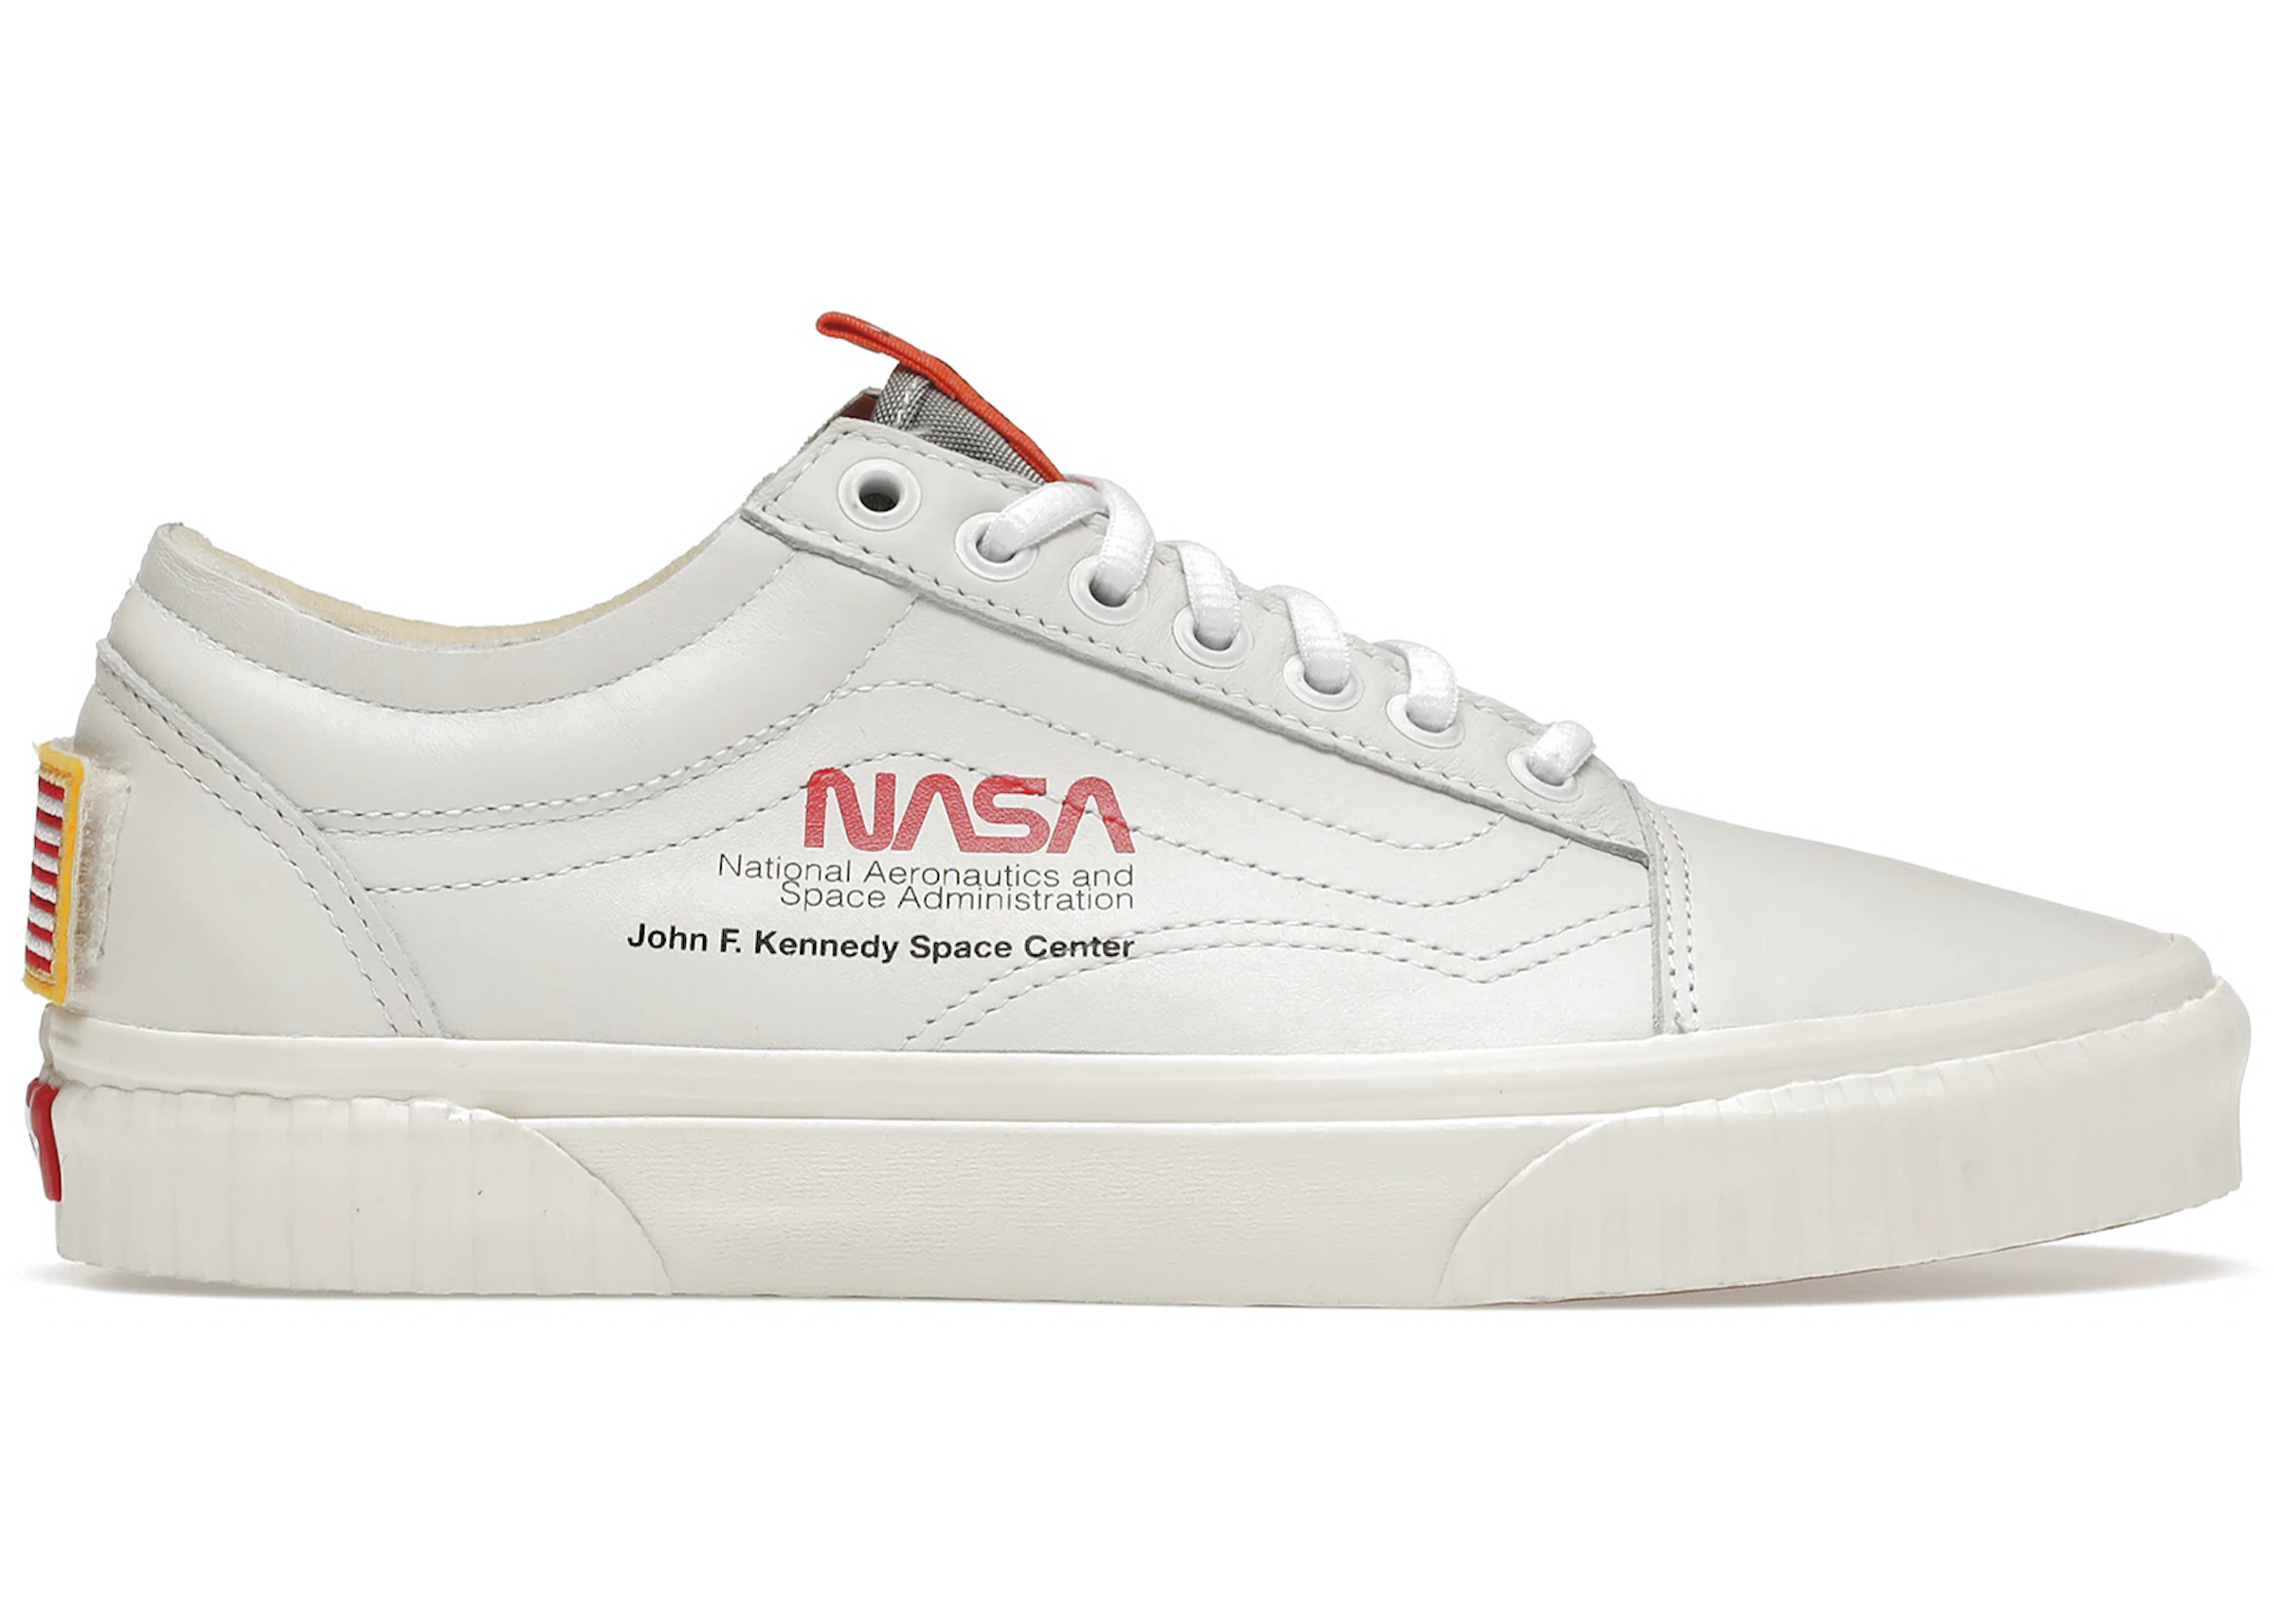 Vans Old Skool NASA Space Voyager True White - VN0A38G1UP9/VN0A38G1UP91 - US